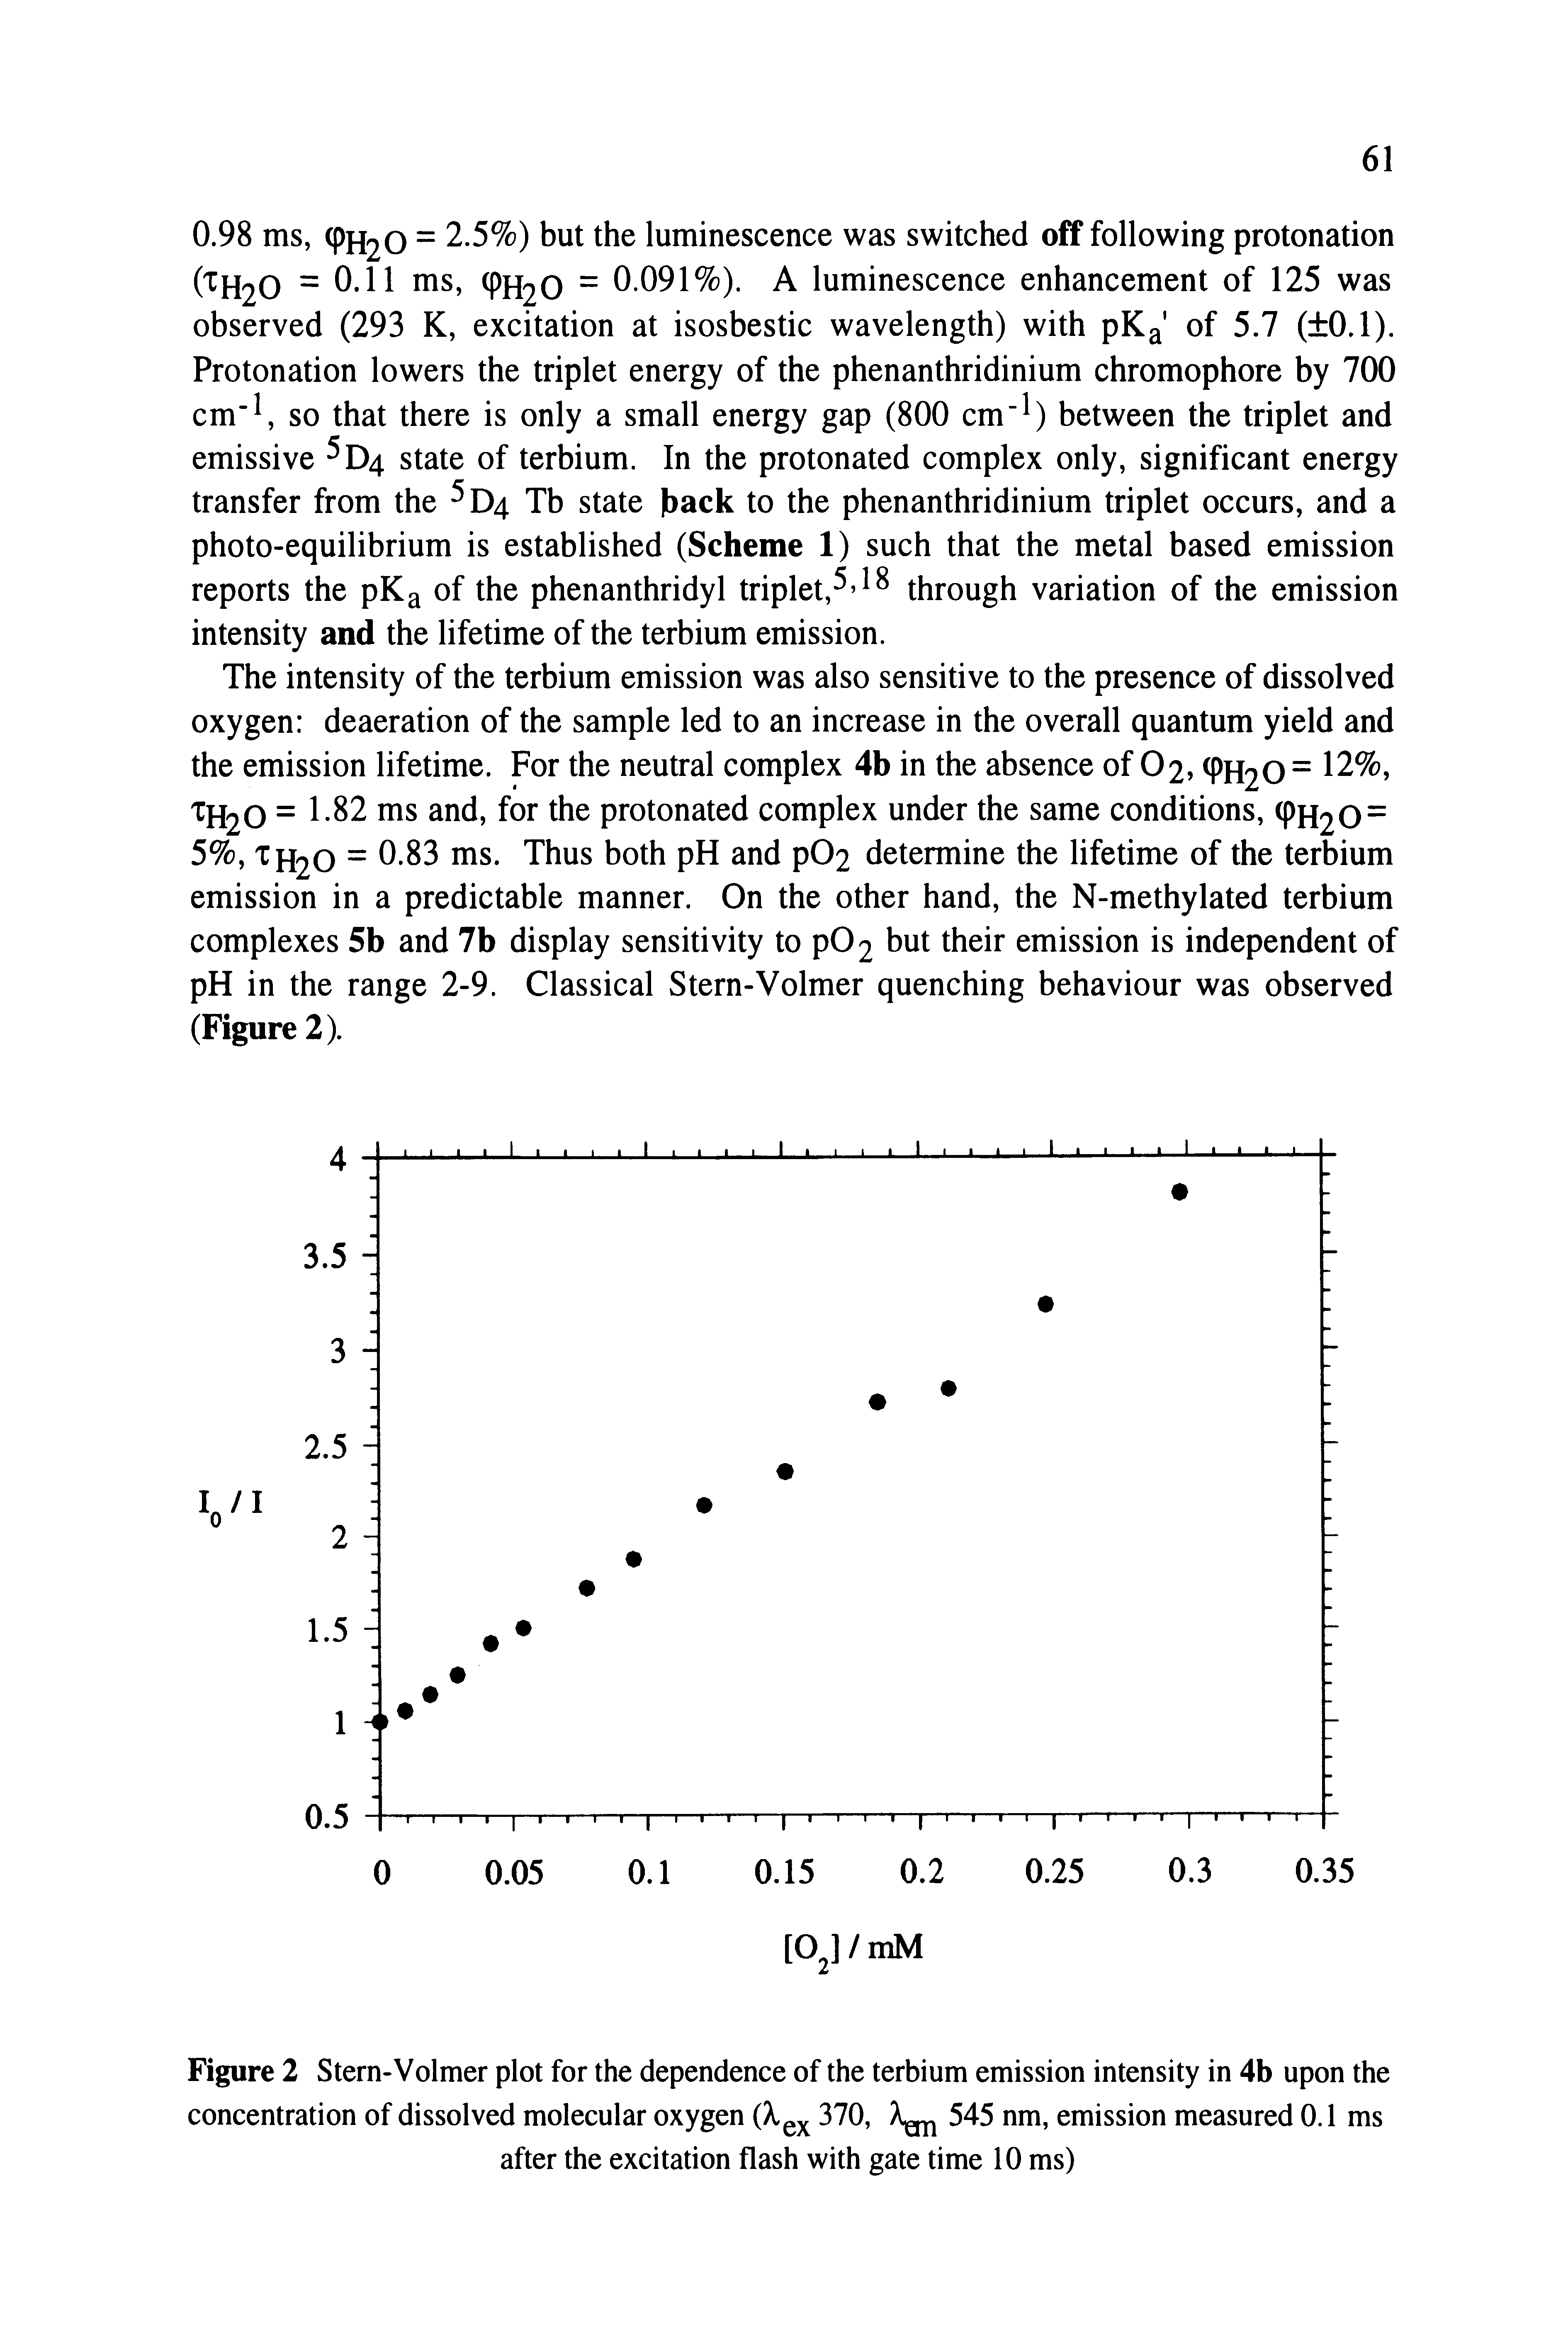 Figure 2 Stern-Volmer plot for the dependence of the terbium emission intensity in 4b upon the concentration of dissolved molecular oxygen 370, 545 nm, emission measured 0.1 ms...